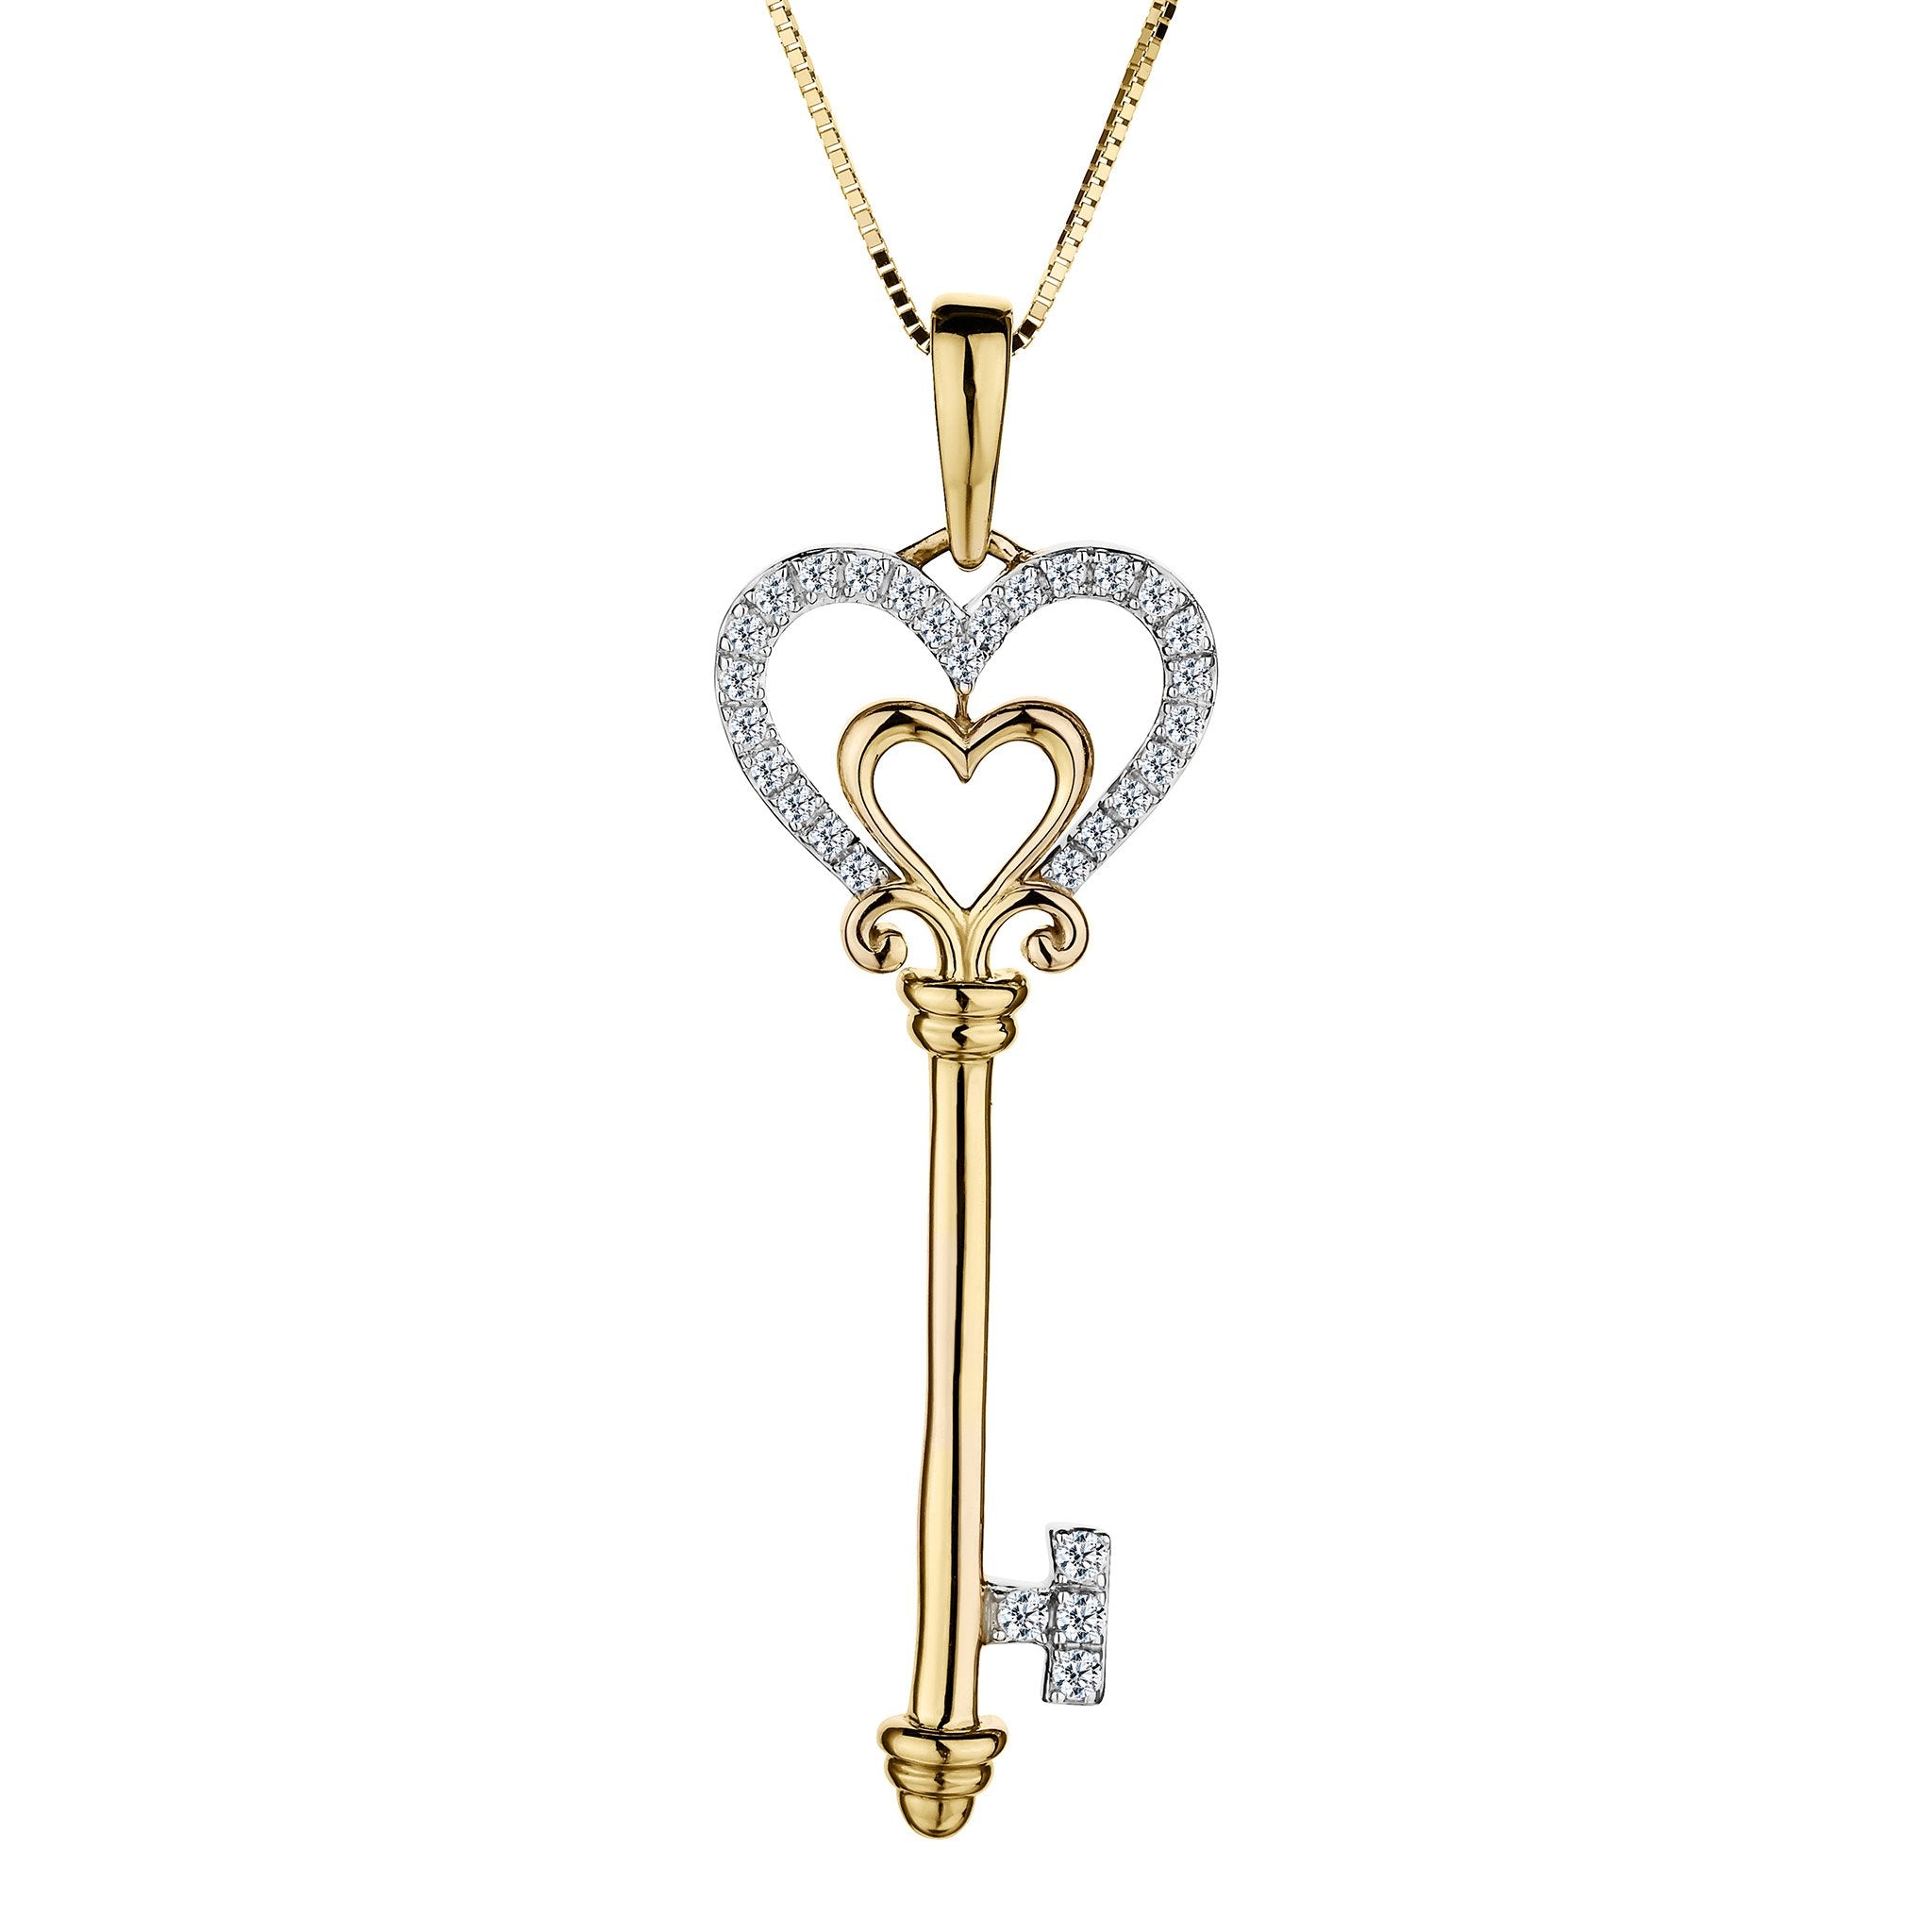 .15 Carat Diamond "Love Key" Pendant,  10kt Yellow Gold. Necklaces and Pendants. Griffin Jewellery Designs.